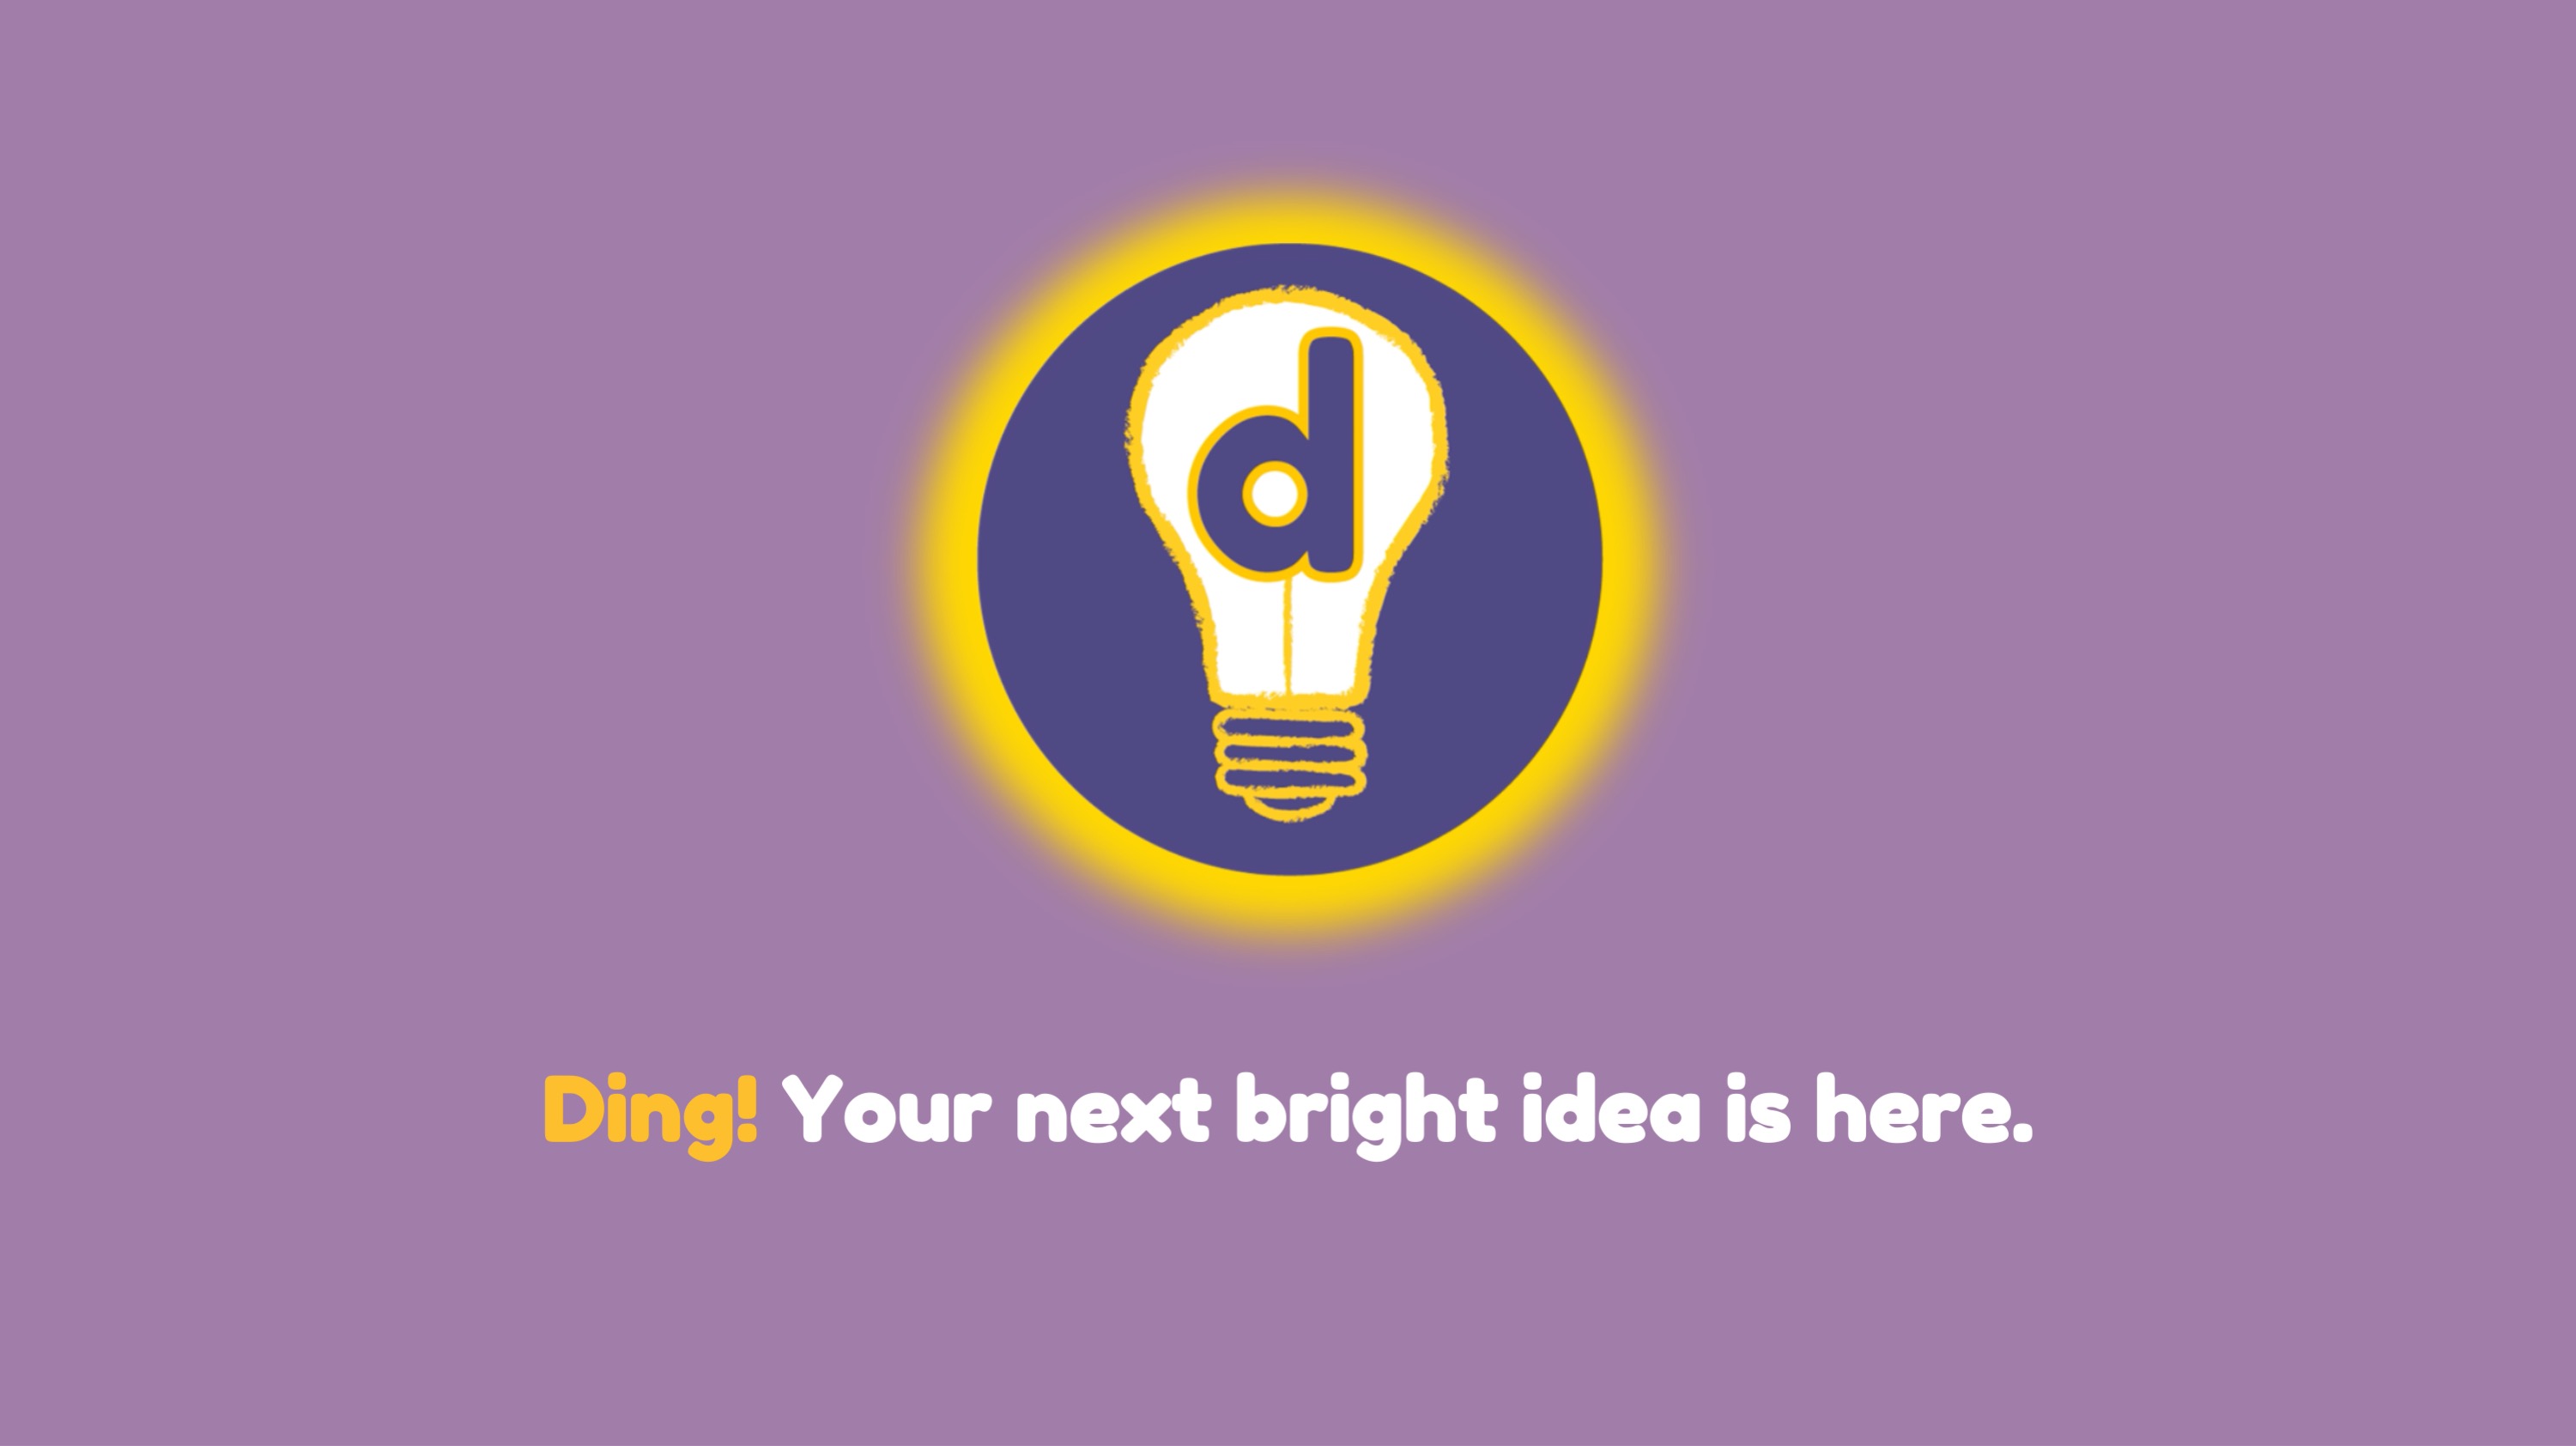 Ding! Your next bright idea is here.